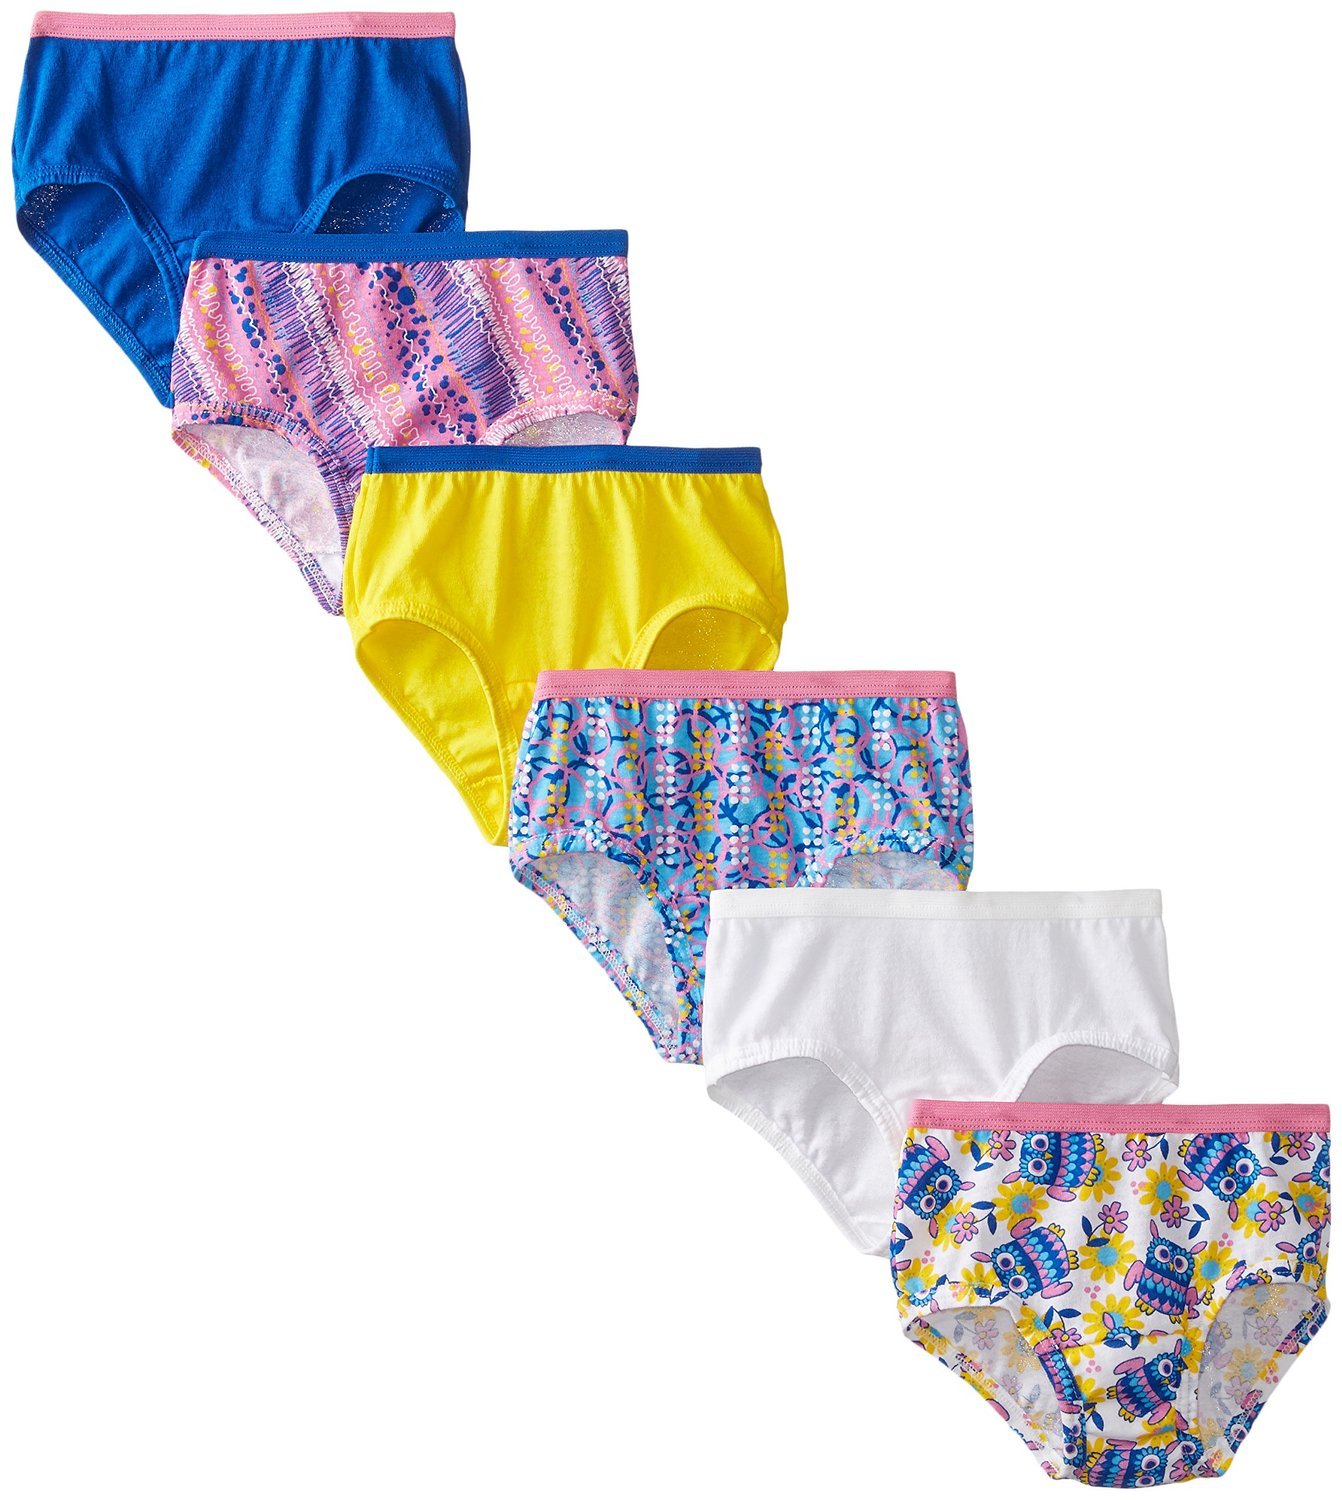 Fruit of the Loom Girl's Eversoft Brief Underwear (6 Pack)